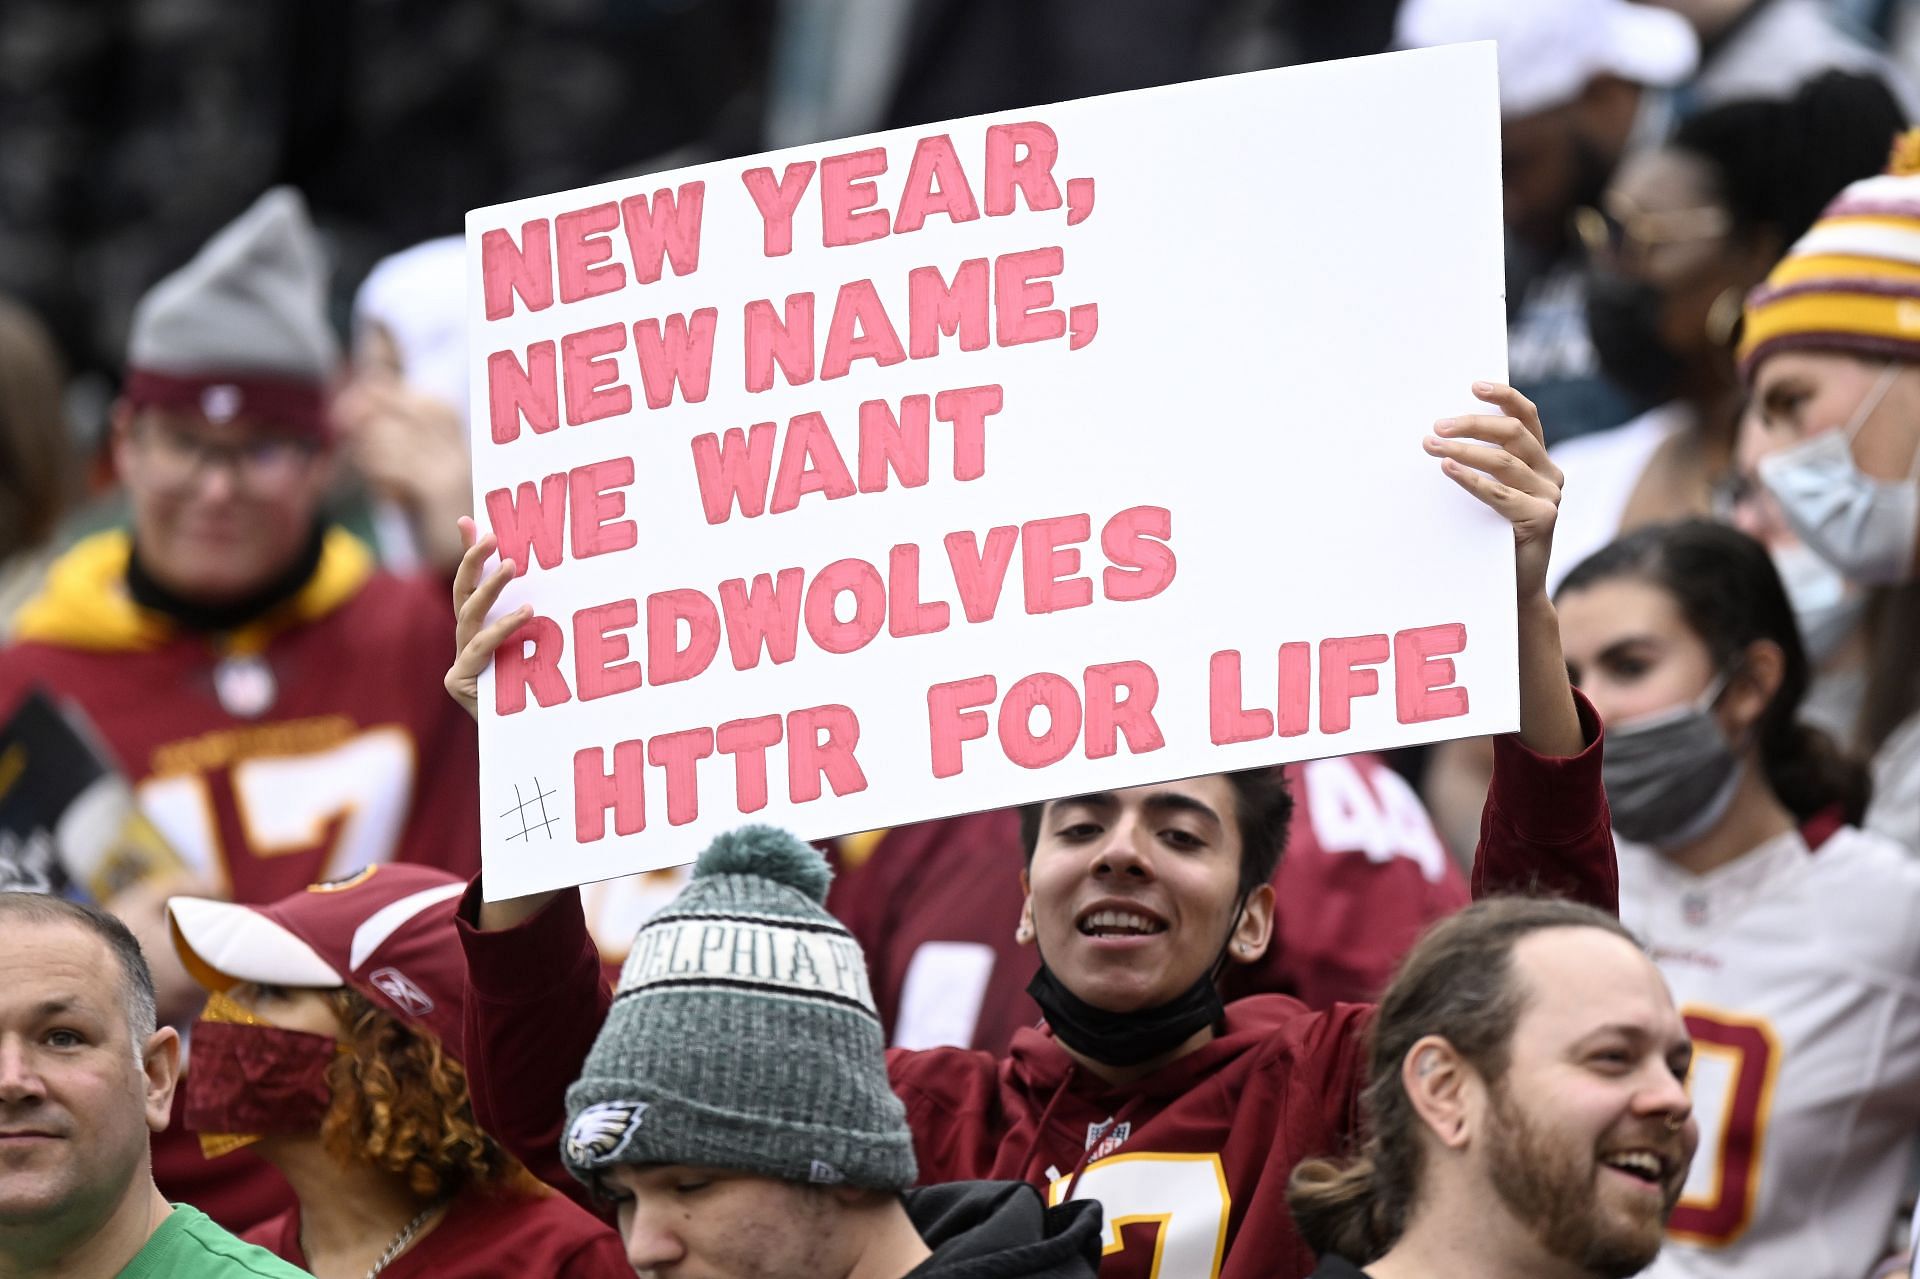 A Washington Football Team holds a sign in support of a new name for the team